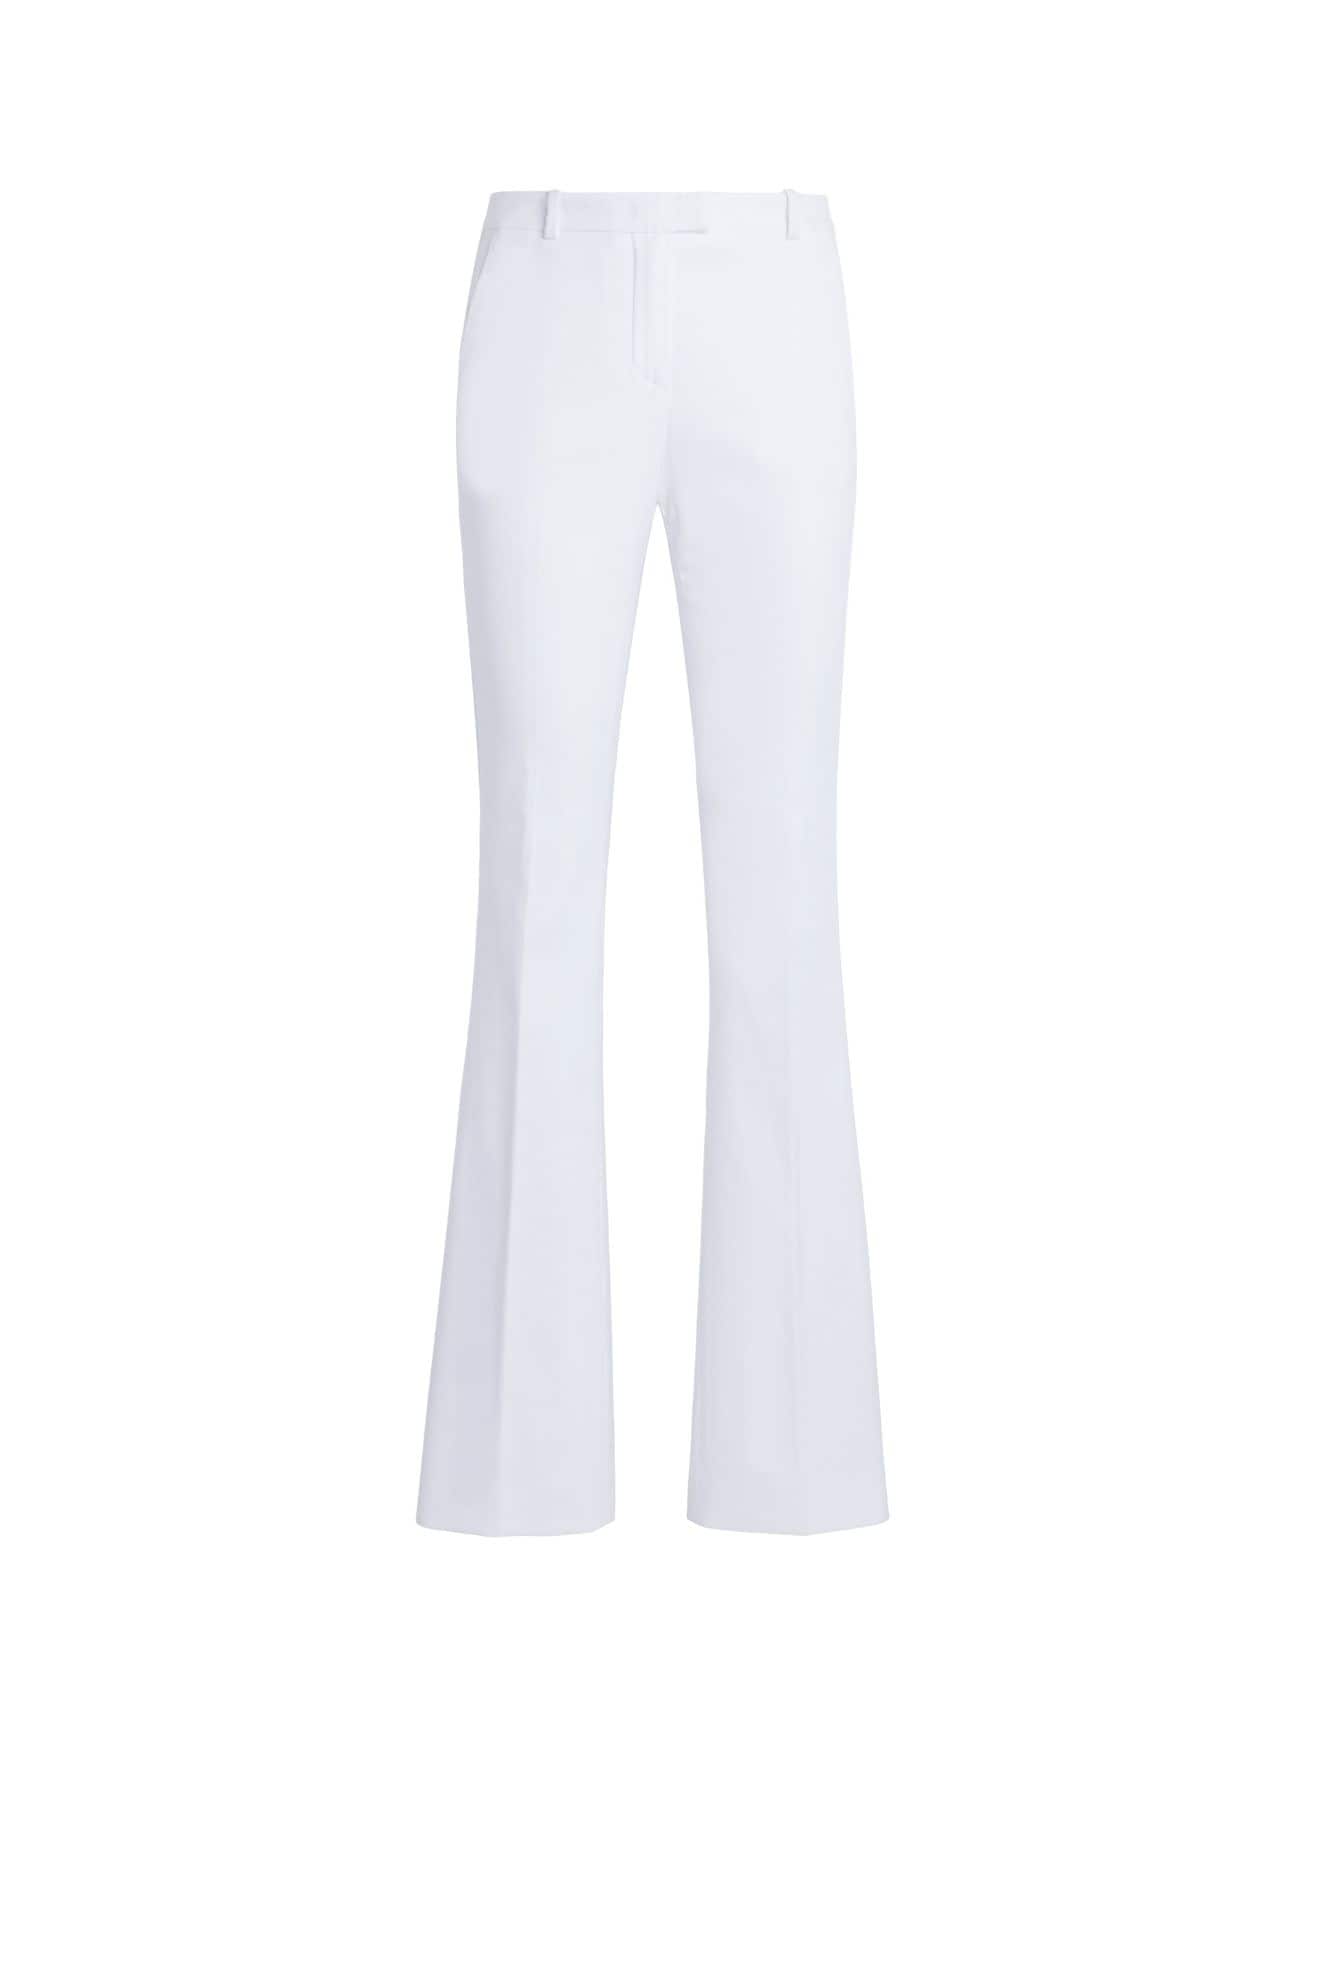 FableStreet Bottoms Pants and Trousers  Buy FableStreet High Waist Wide  Leg Trousers  Off White Online  Nykaa Fashion